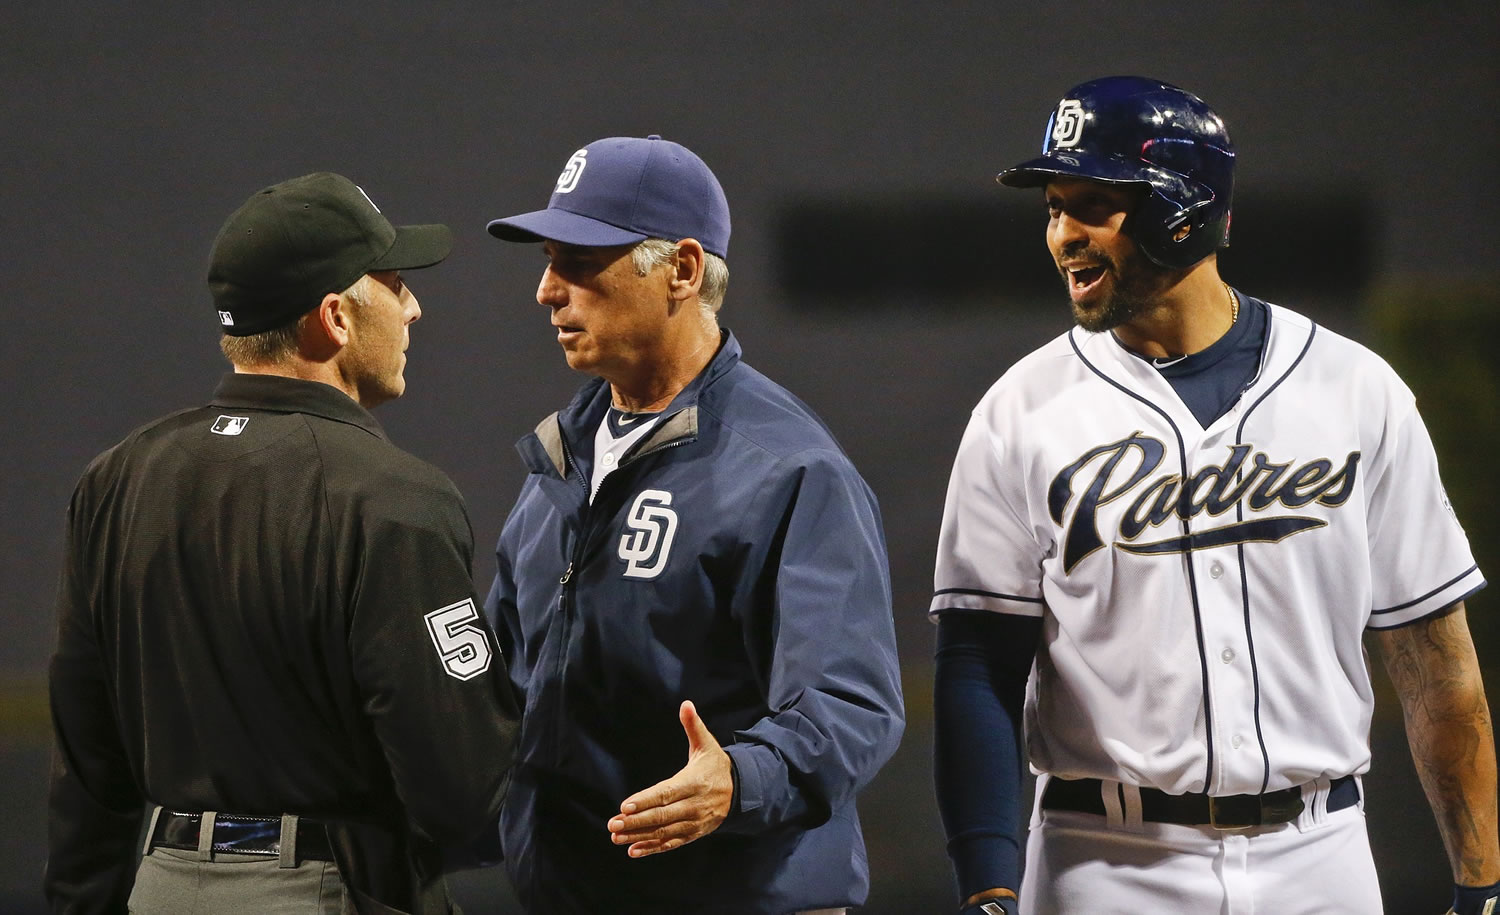 San Diego Padres manager Bud Black attempts a discussion with home plate umpire Dan Iassogna after he was thrown out of the game along with Matt Kemp, right, in the eighth inning against the New York Mets on June 1, 2015, in San Diego.